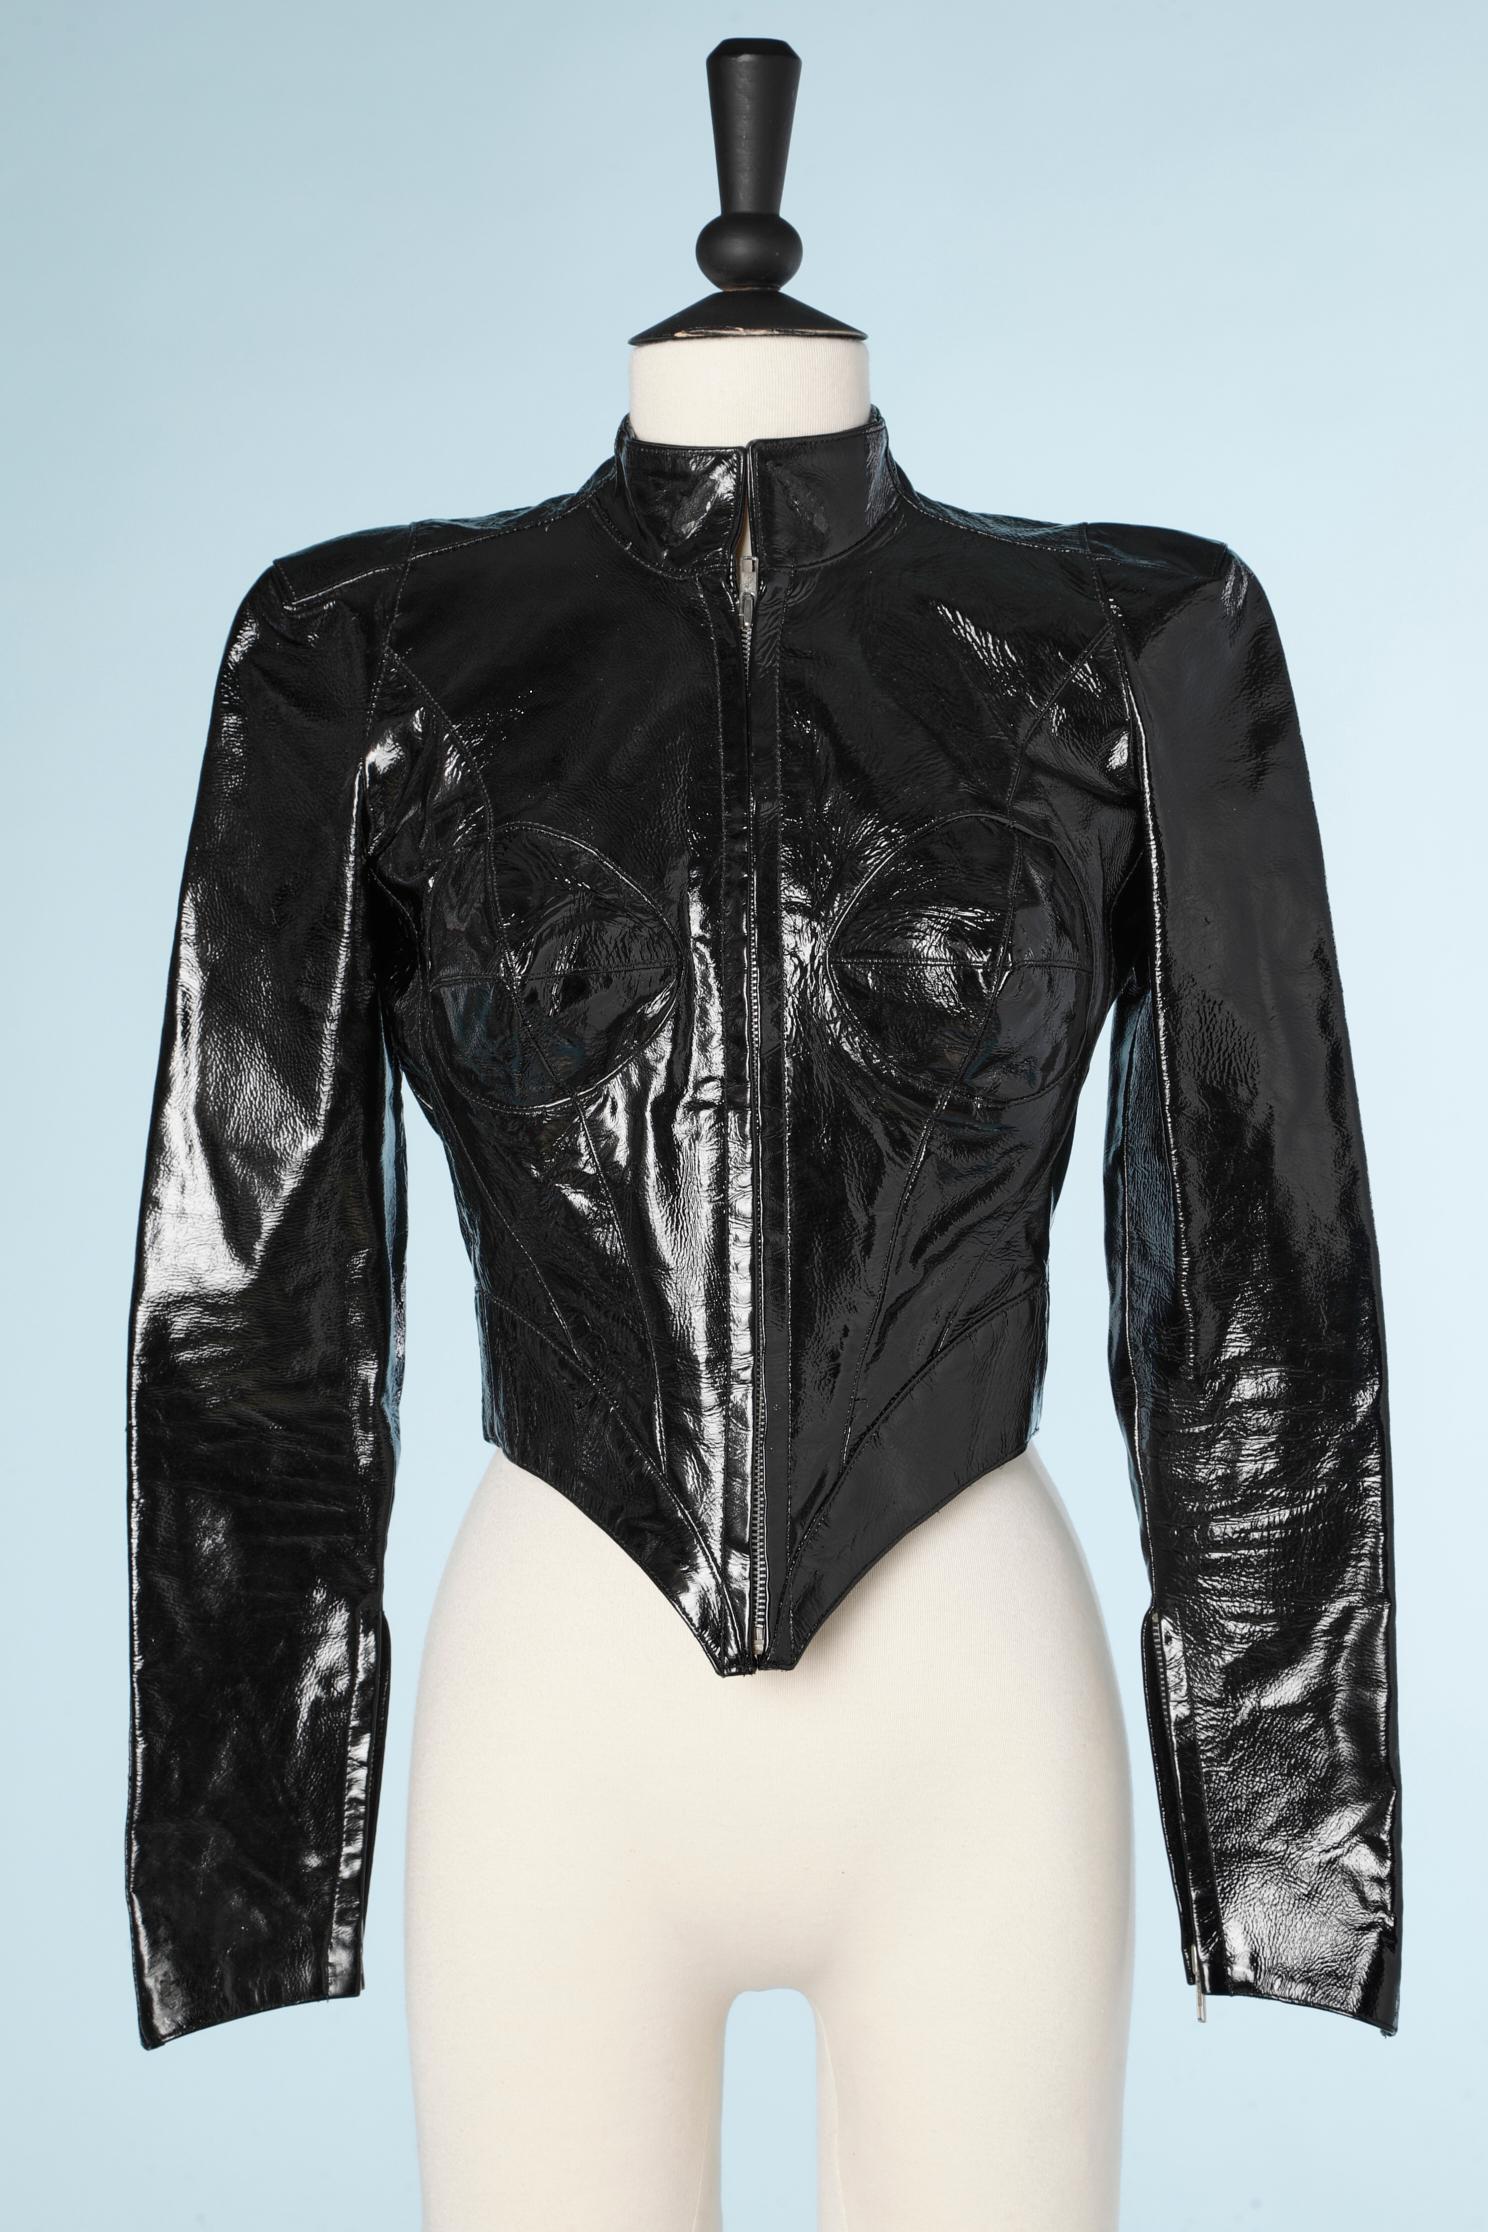 Black patent leatherjacket with breast cut shape.
SIZE: 38